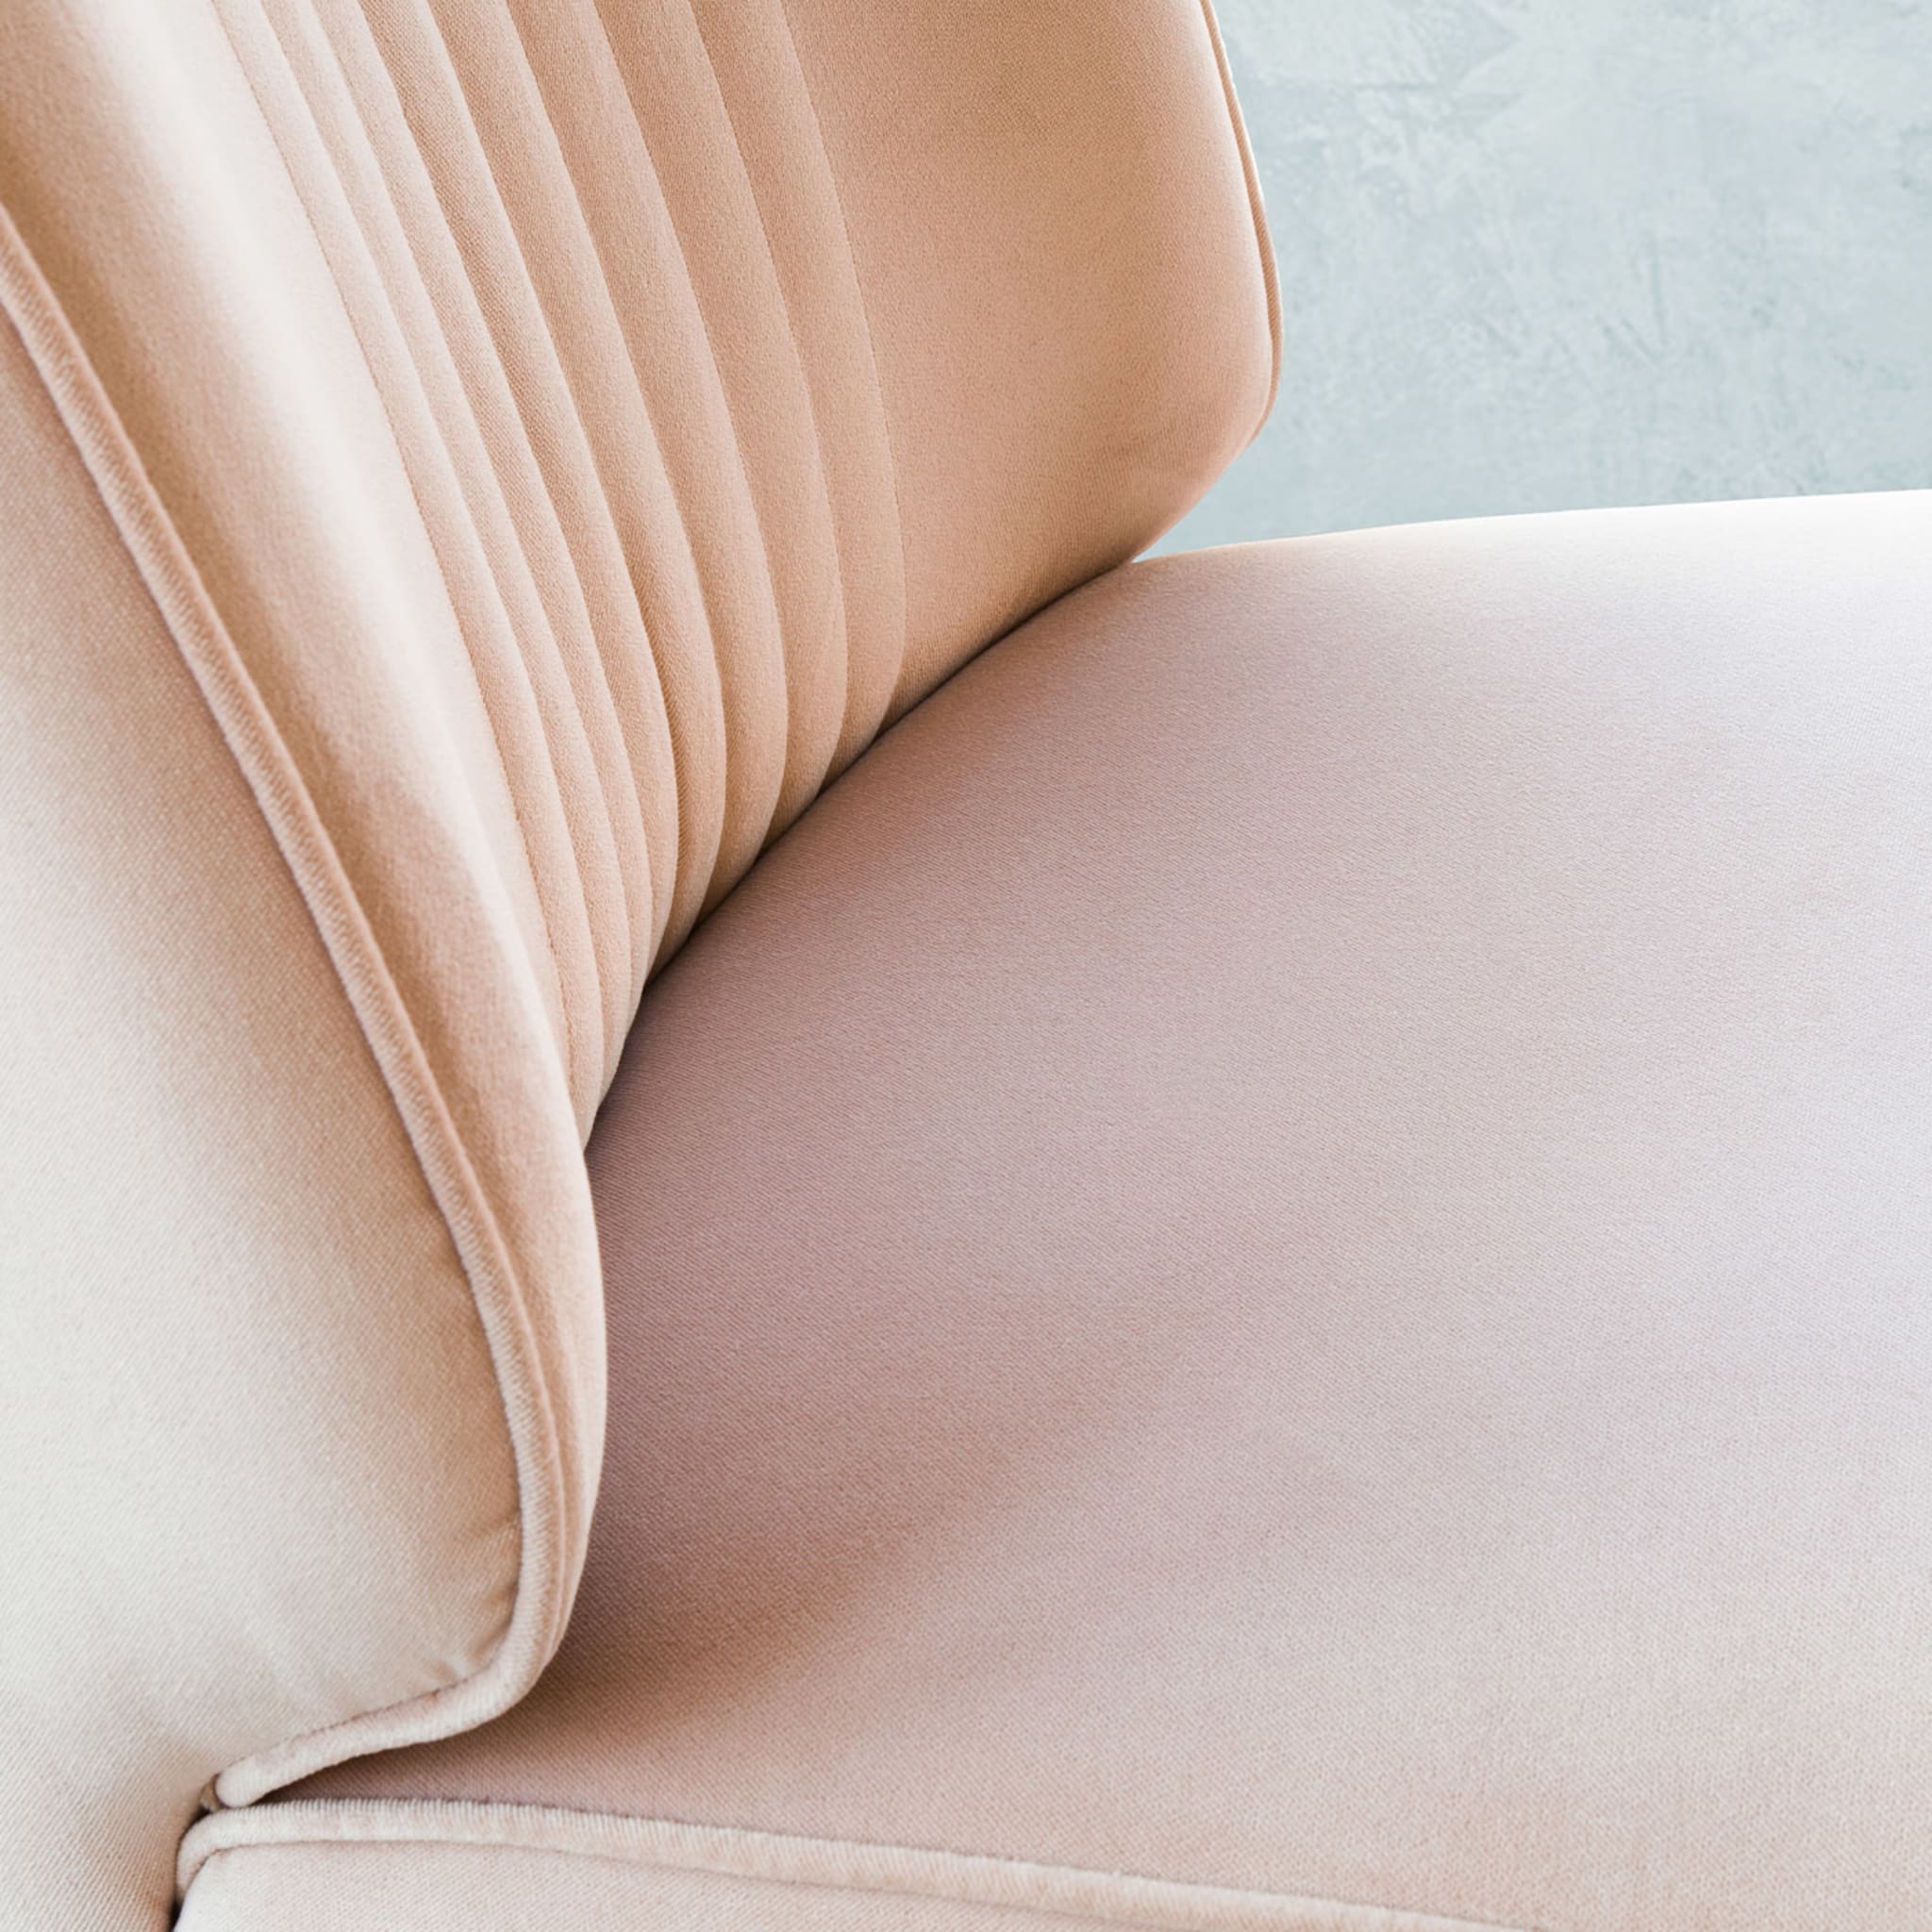 Giulia T. Pink Armchair by Lucia Ippolito - Alternative view 1